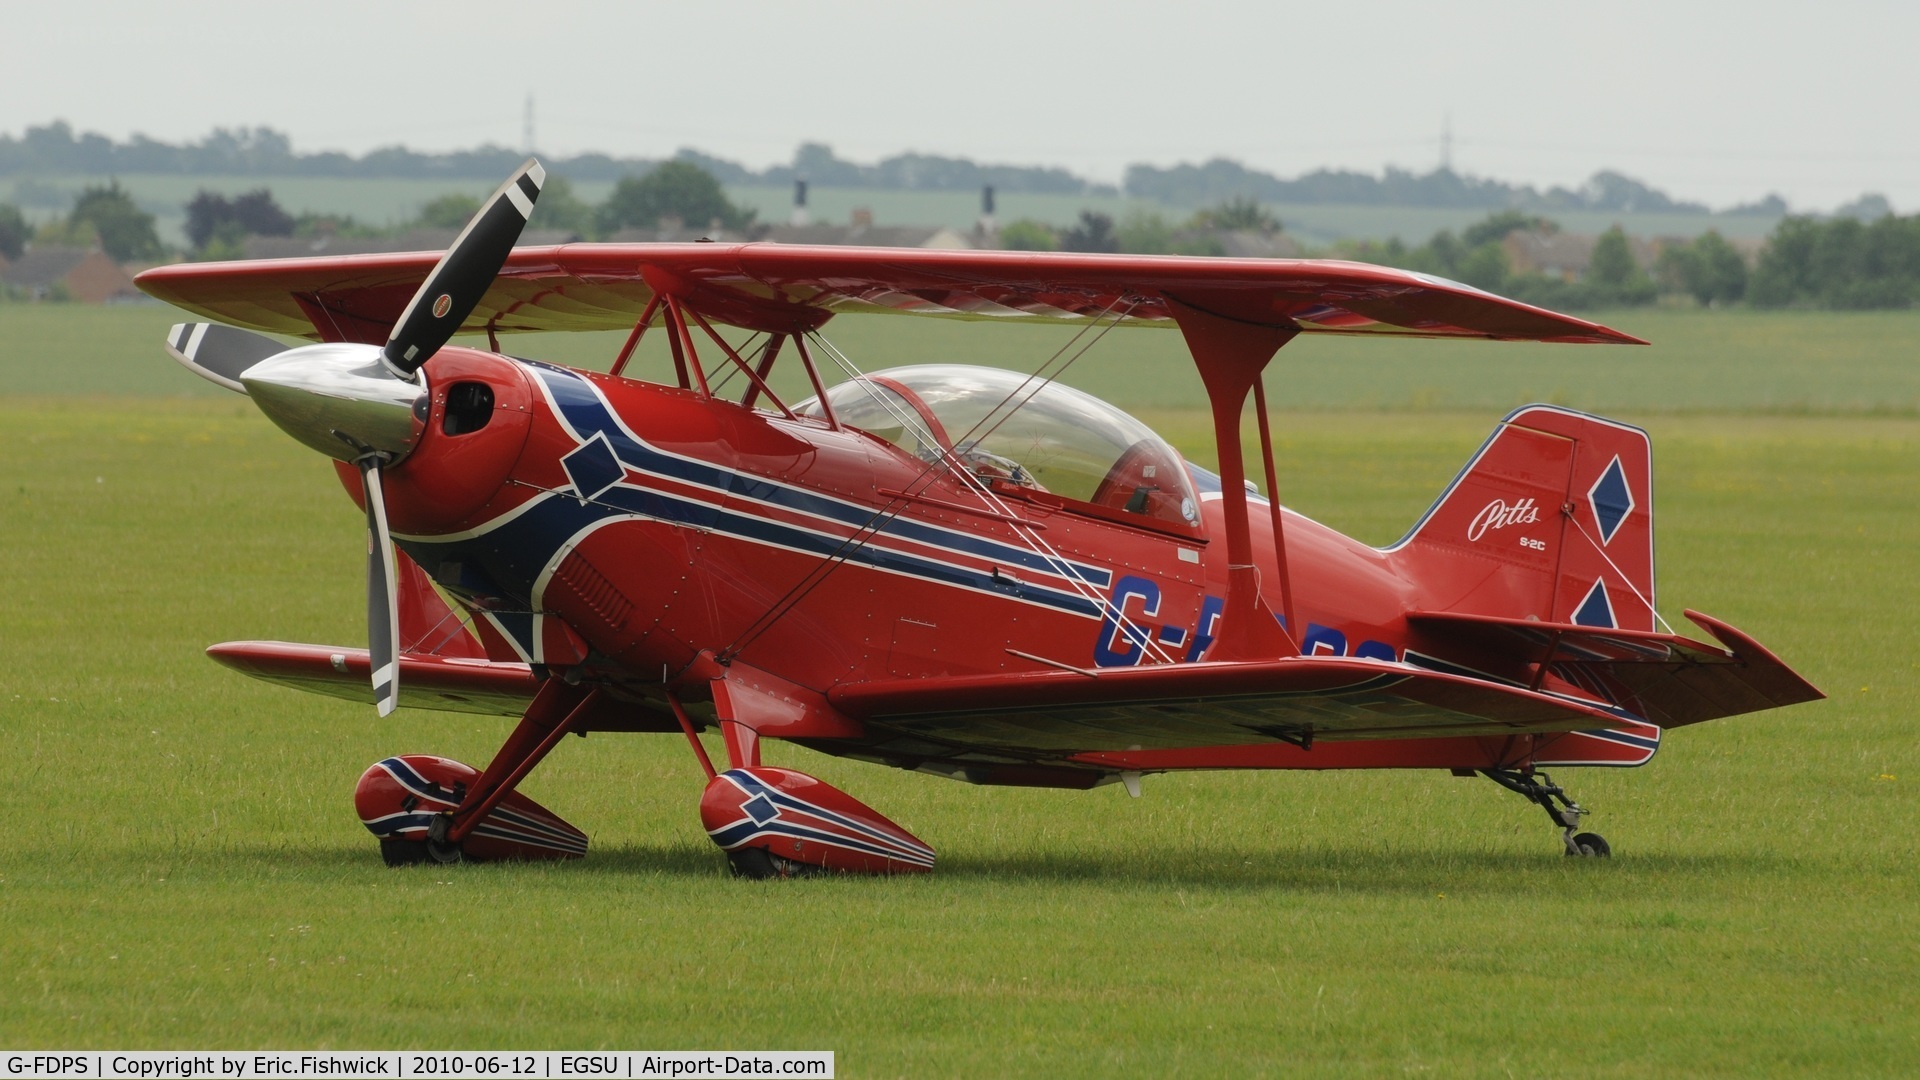 G-FDPS, 2004 Aviat Pitts S-2C Special C/N 6066, 3. G-FDPS at The Duxford Trophy Aerobatic Contest, June 2010